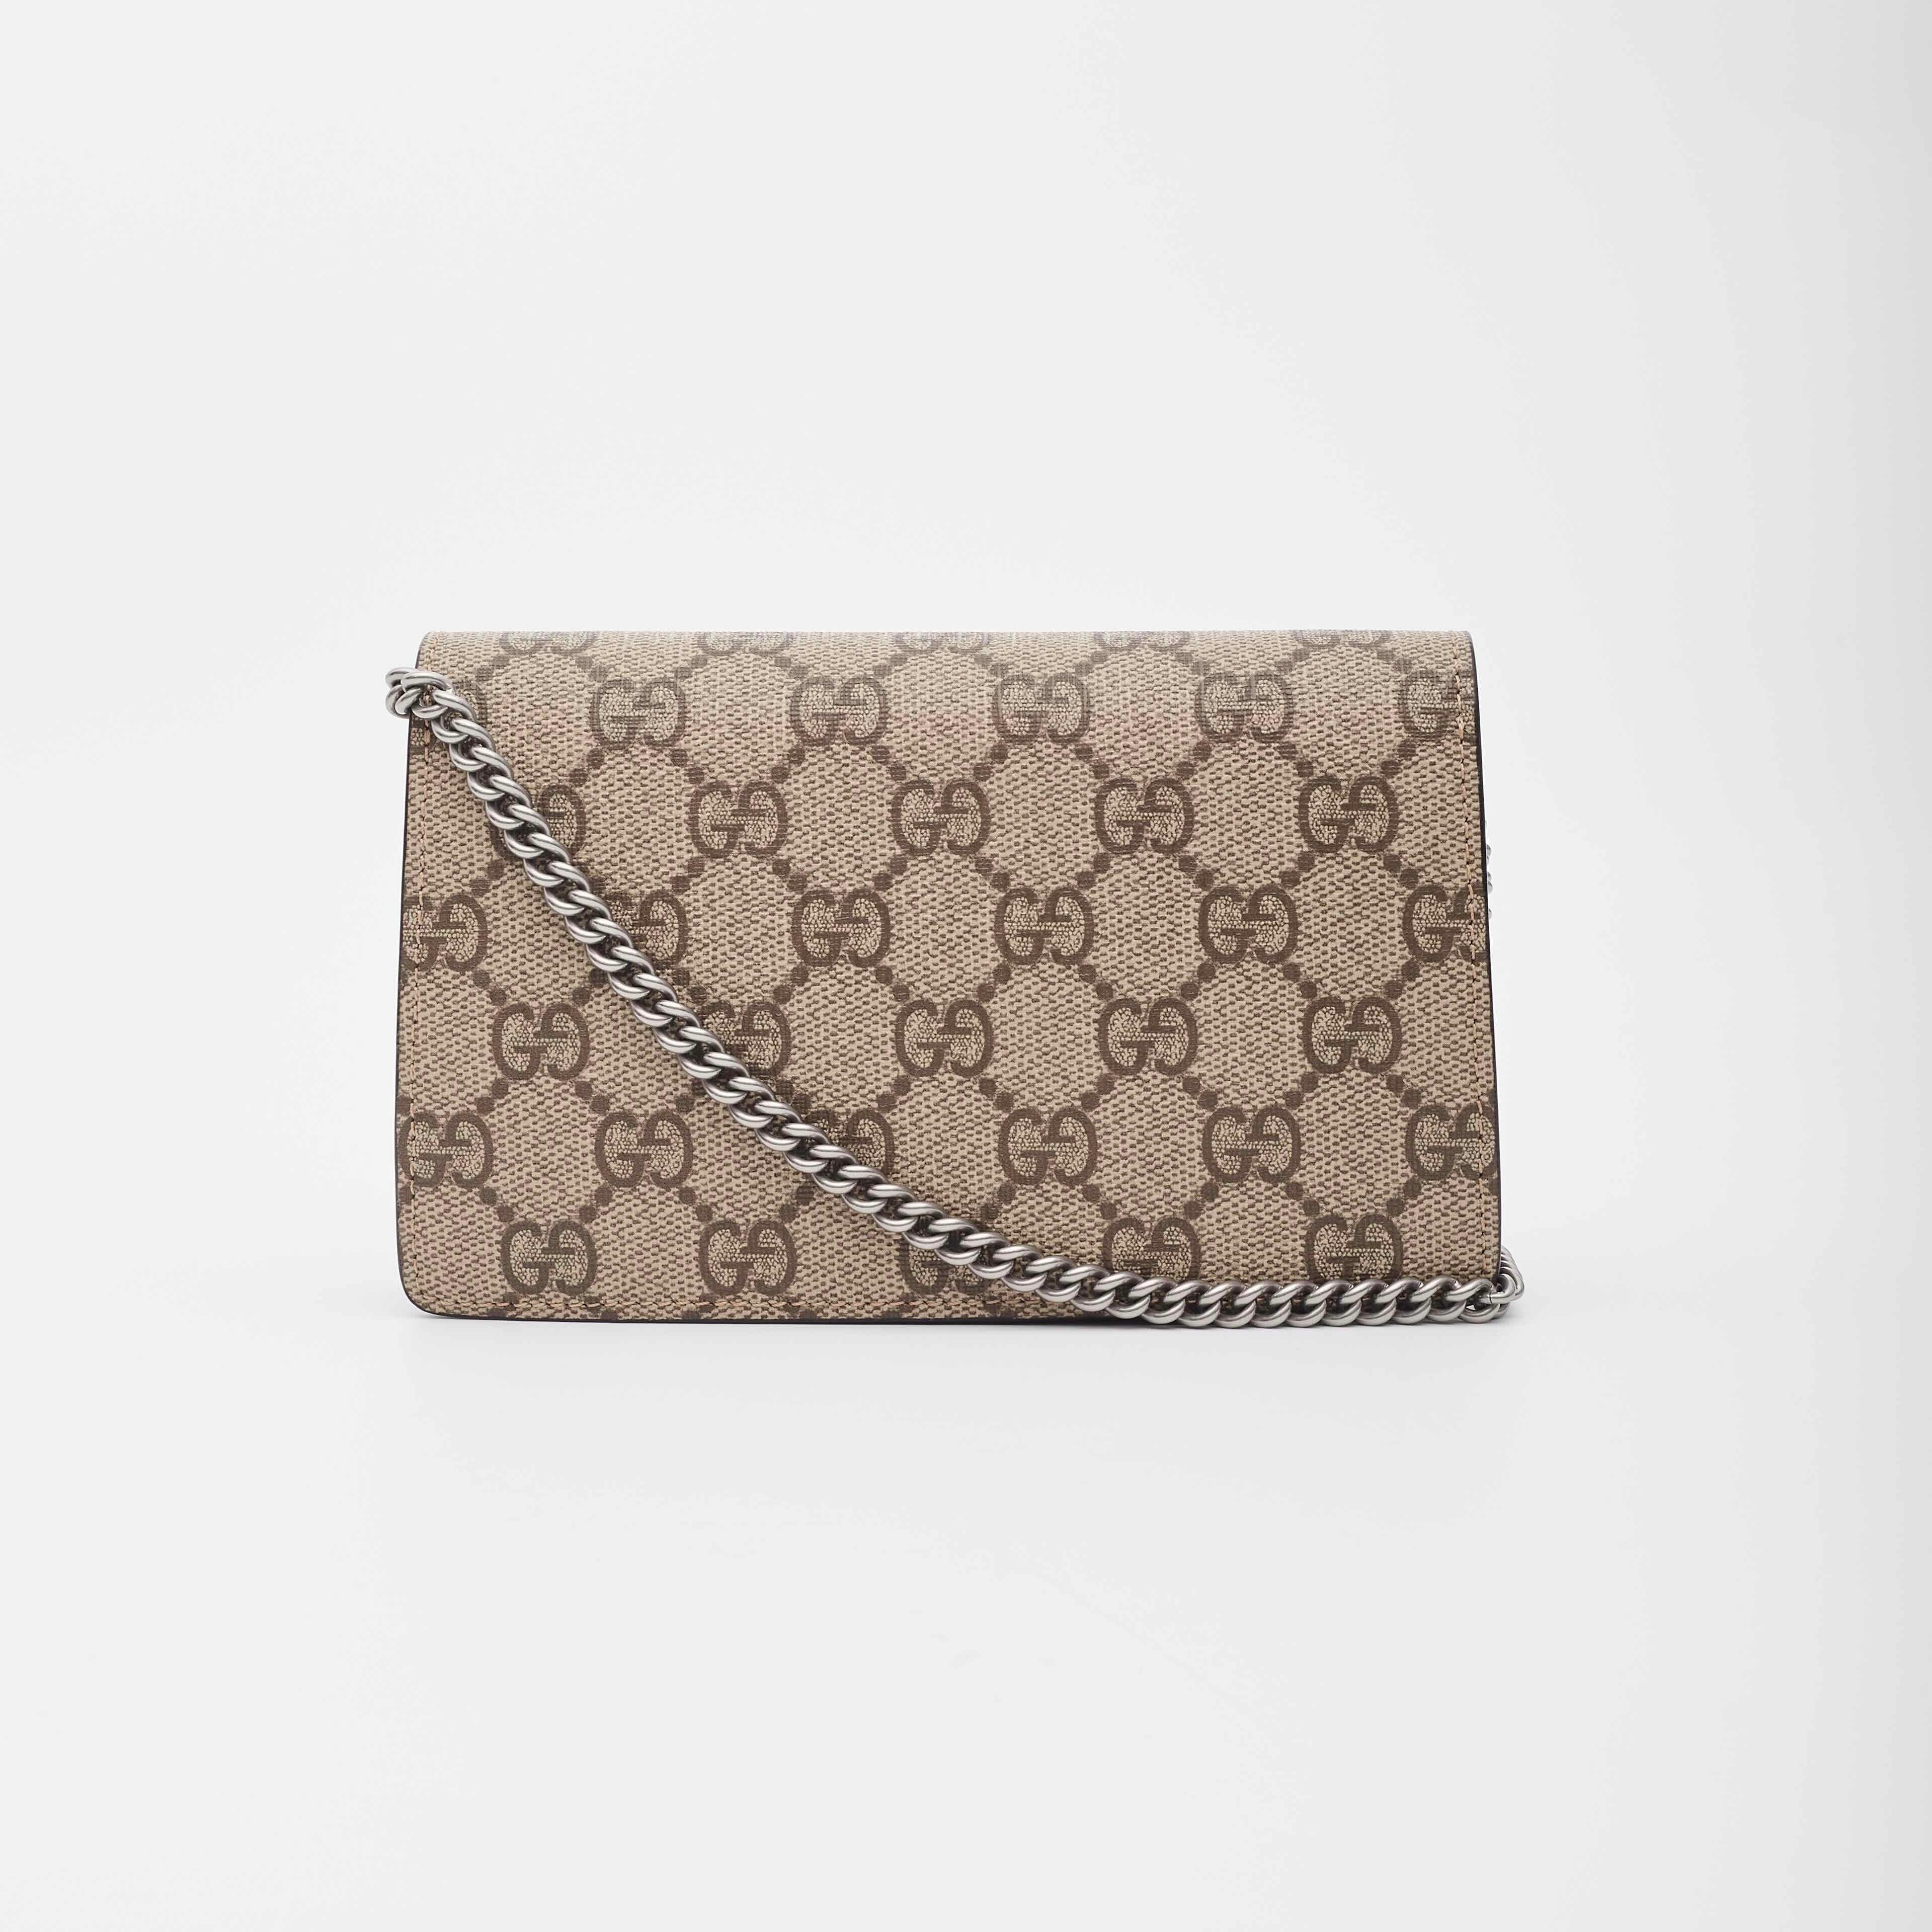 This petite bag is made of signature Gucci monogram coated canvas. This bag features a silver chain shoulder strap, a textured horseshoe tiger spur on the front flap, snap closure and a beige suede interior lining with a key chain clasp that can